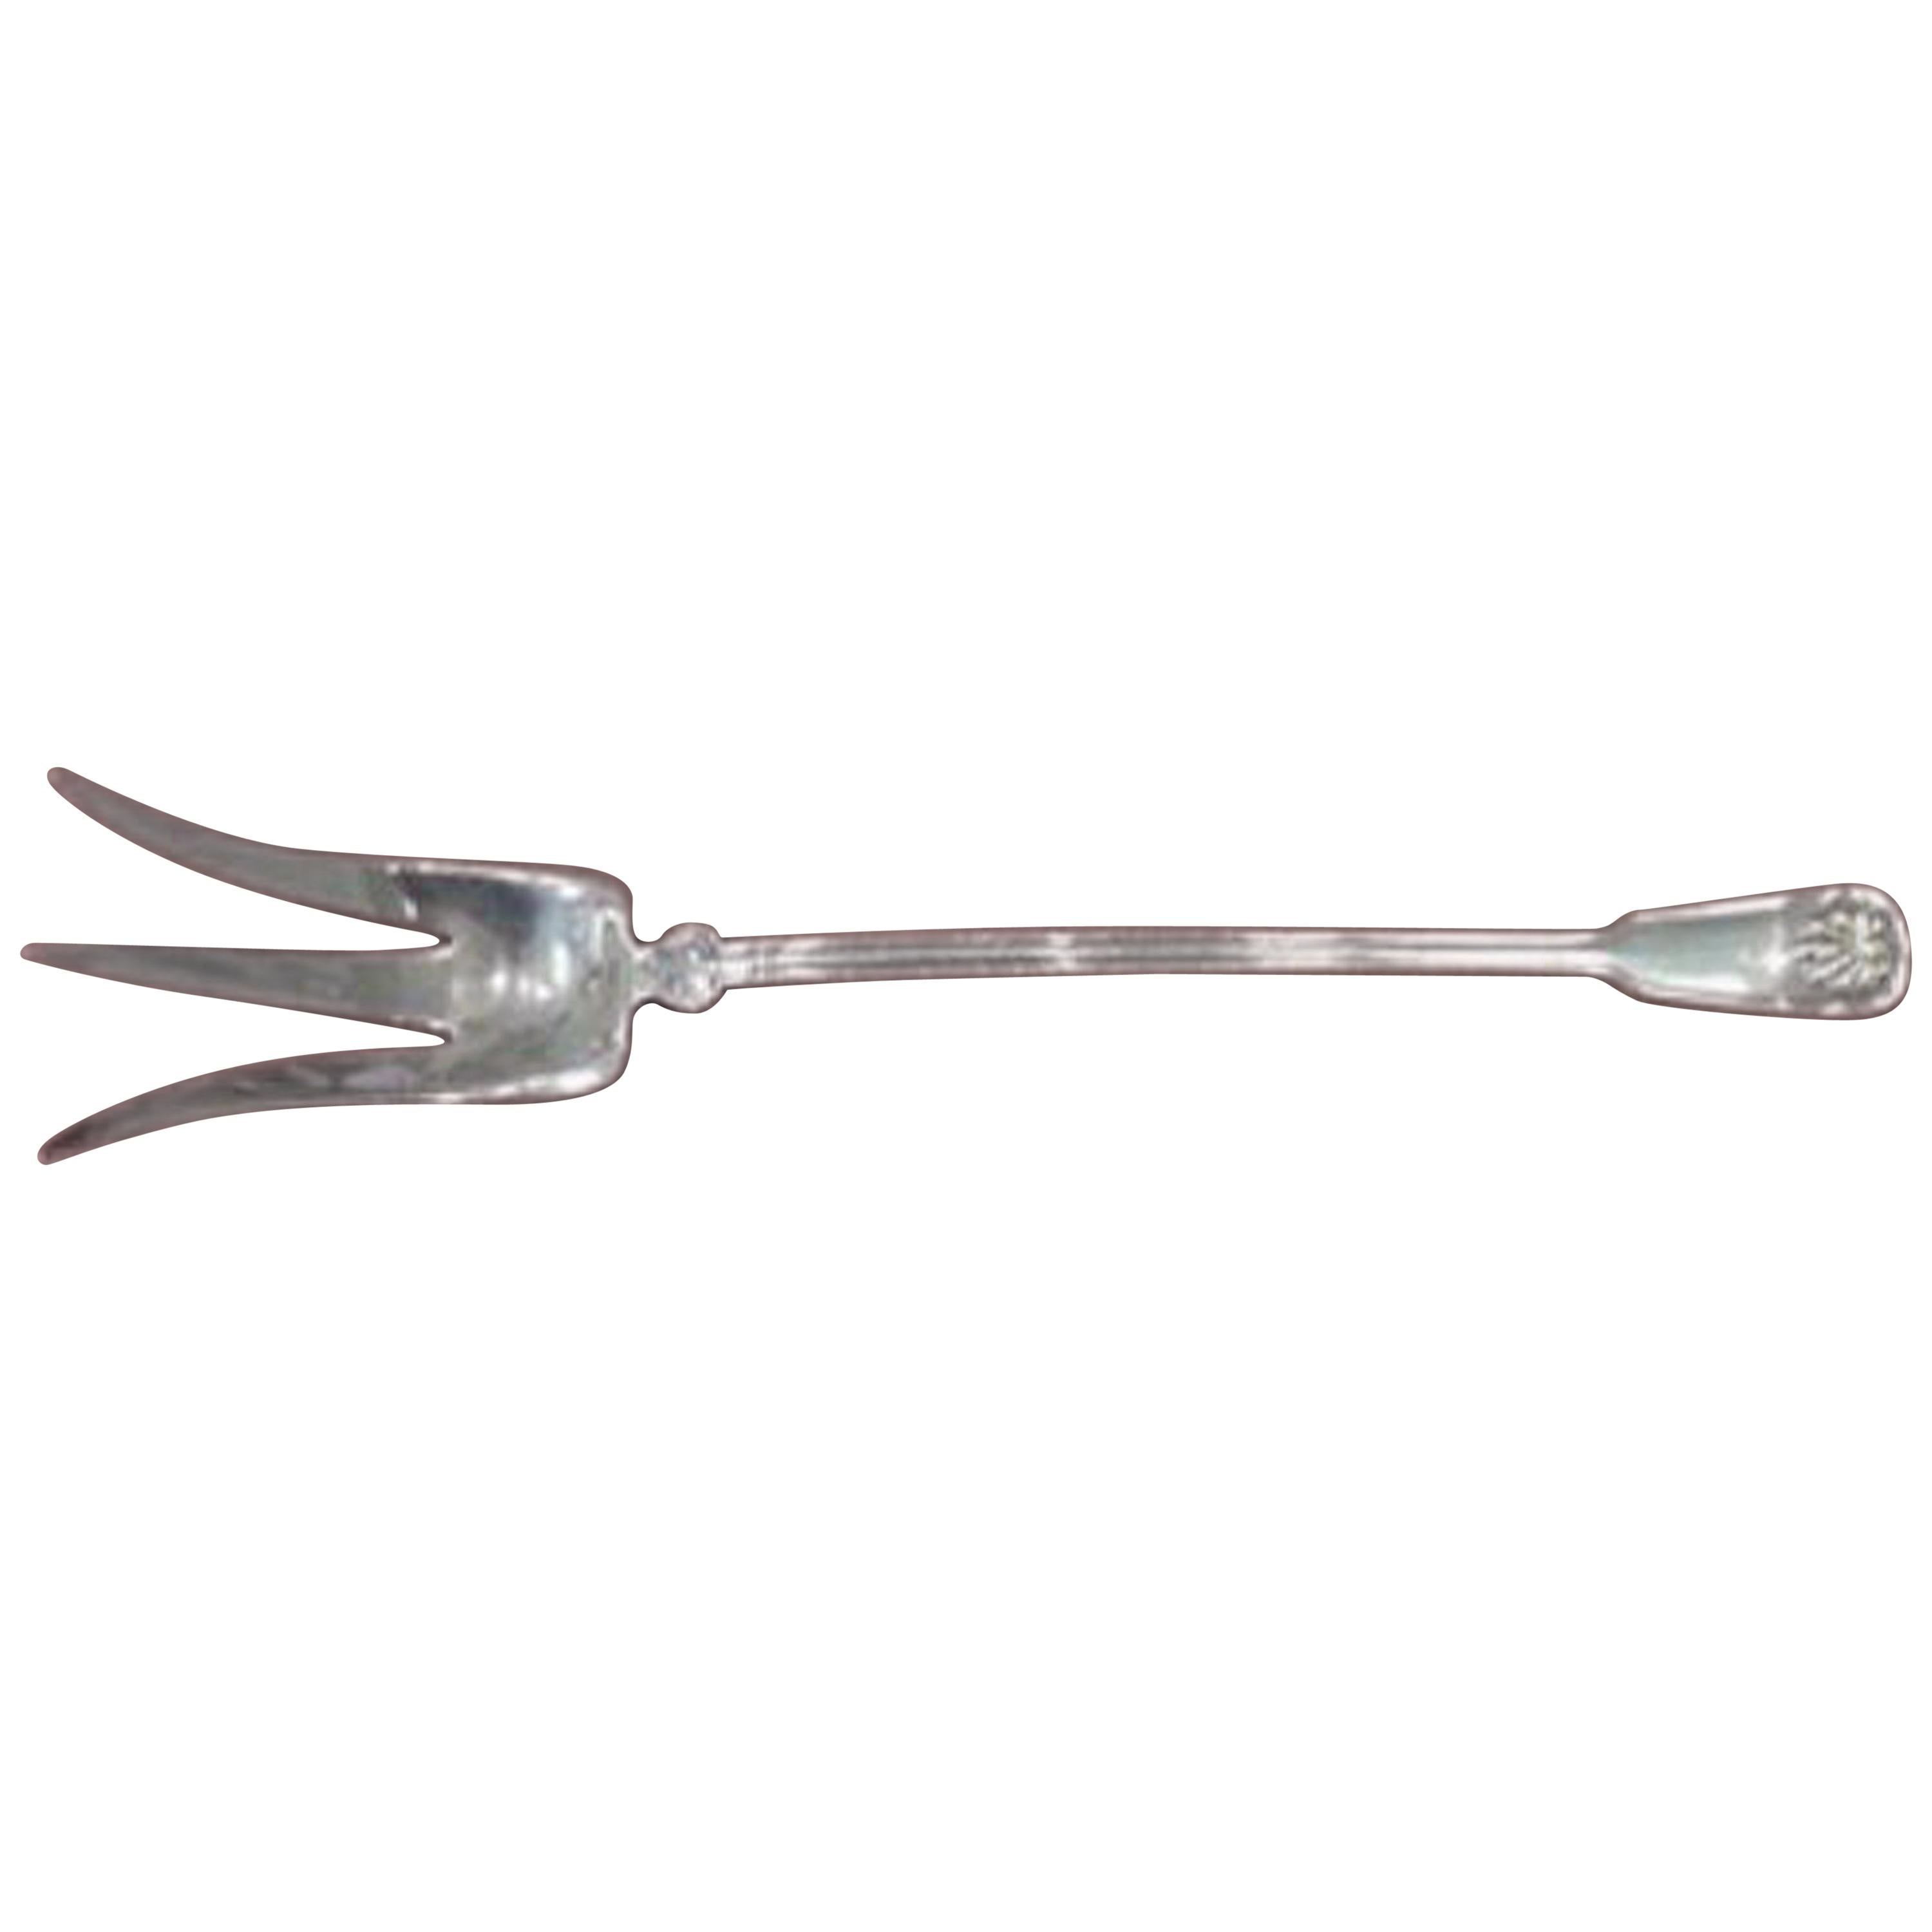 Shell and Thread by Tiffany & Co. Sterling Silver Lettuce Fork